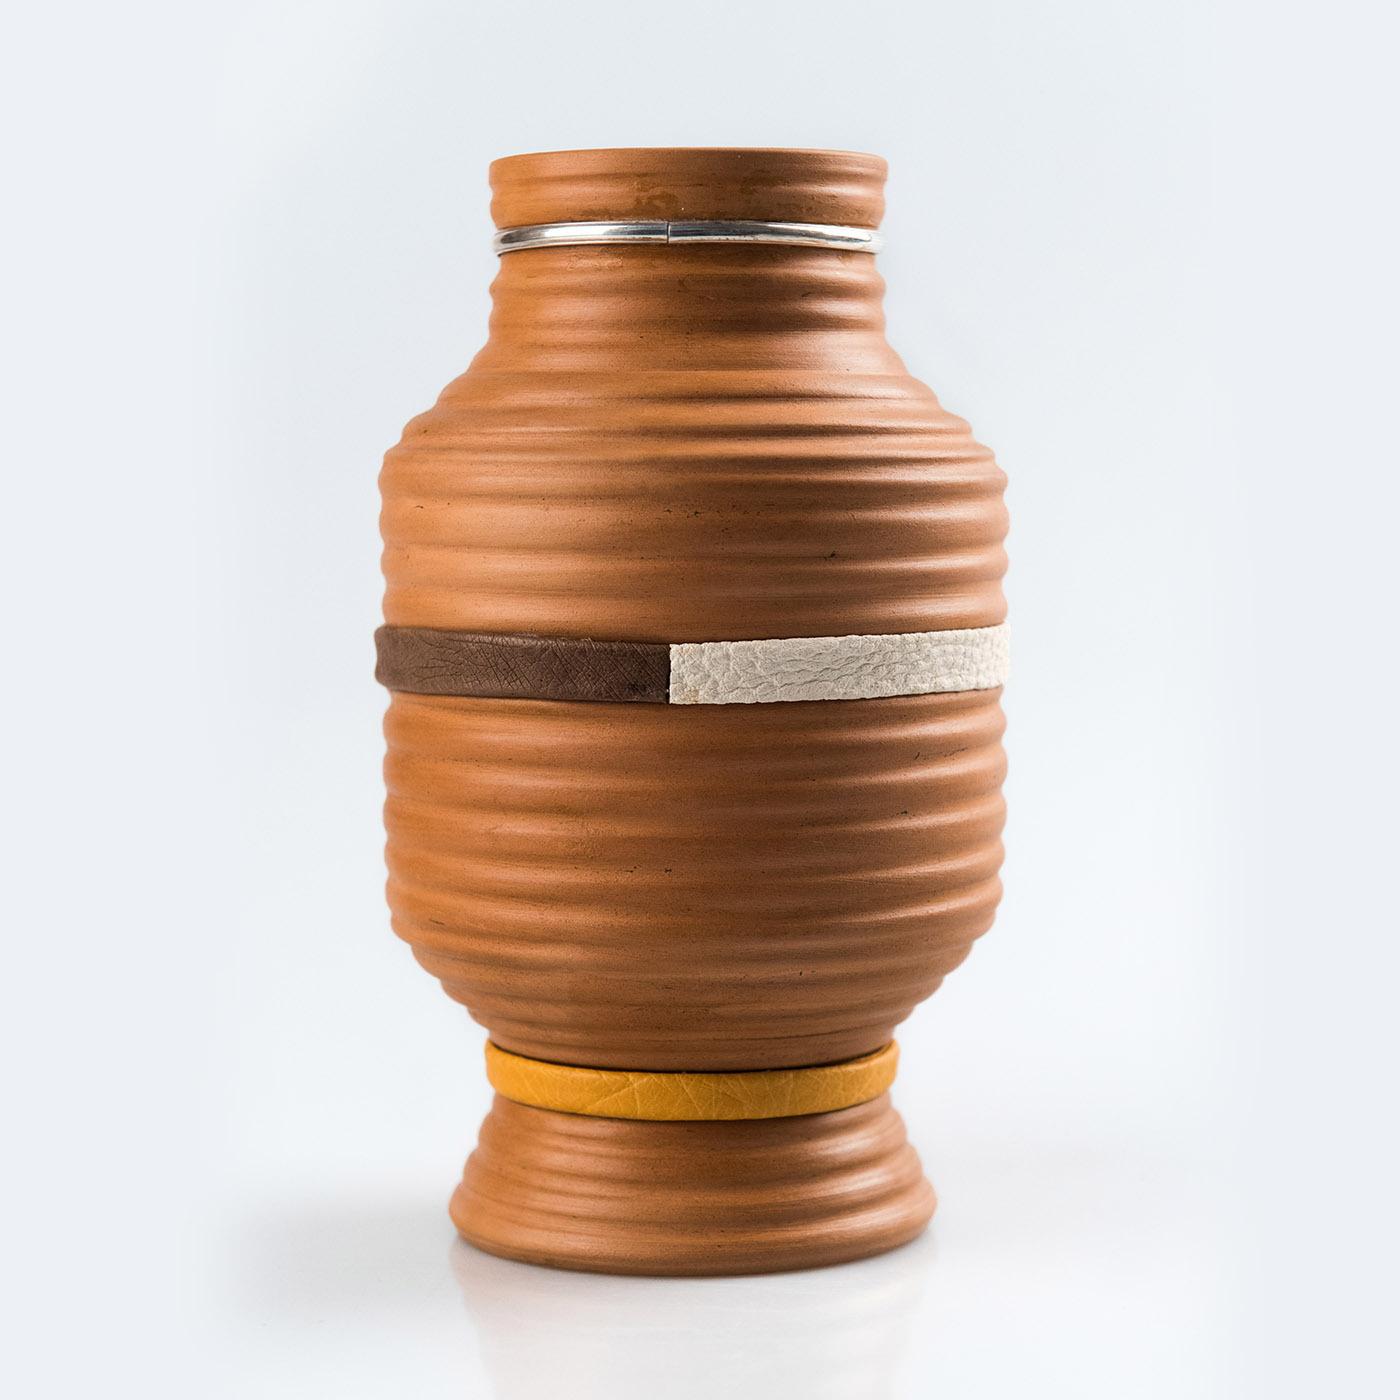 An iconic and singular design from the refined collections of vases by Seleusi, this piece is handmade of first-rate materials following timeless techniques of the Italian artisanal tradition. Shaped by a series of concentric circles, it is